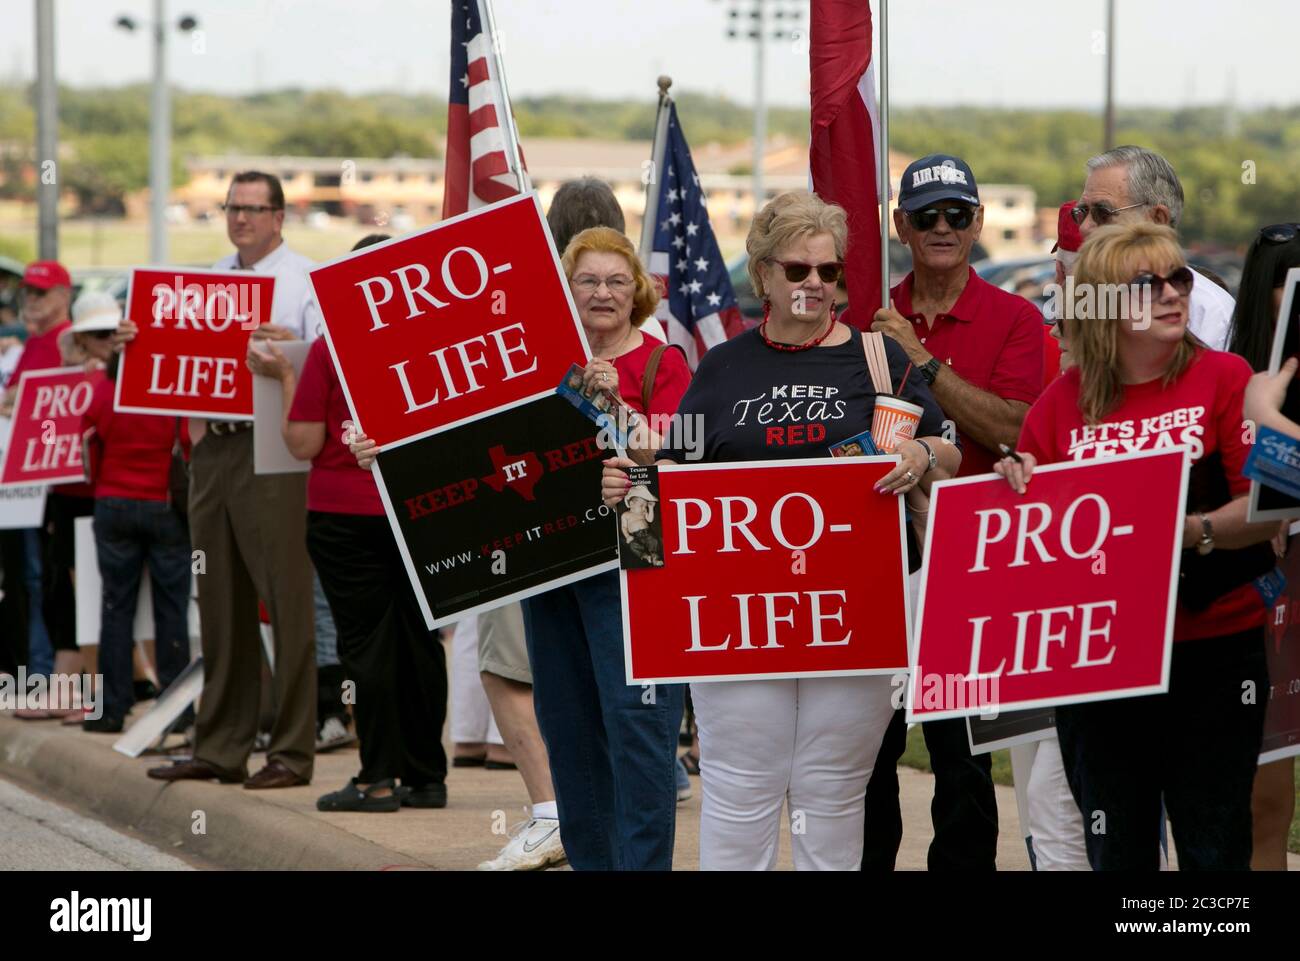 Group of pro-life, republican  citizens from Texas, rally with signs outside an event where  a pro-choice democrat female was announcing her intention to run for office.  mkc/BDP, Inc. Stock Photo